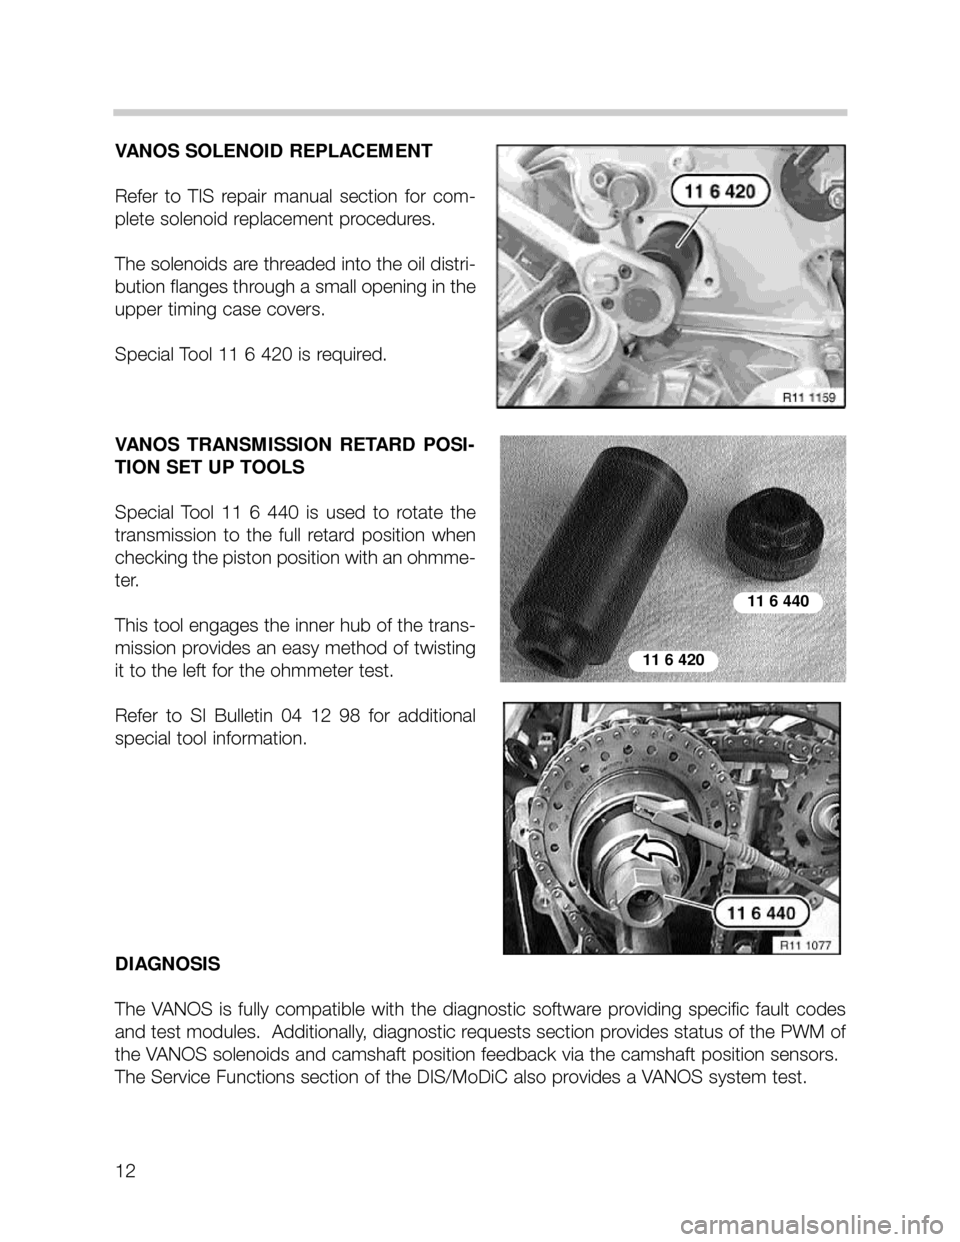 BMW X5 2001 E53 M62TU Engine User Guide 12
VANOS SOLENOID REPLACEMENT
Refer  to  TIS  repair  manual  section  for  com-
plete solenoid replacement procedures.  
The solenoids are threaded into the oil distri-
bution flanges through a small